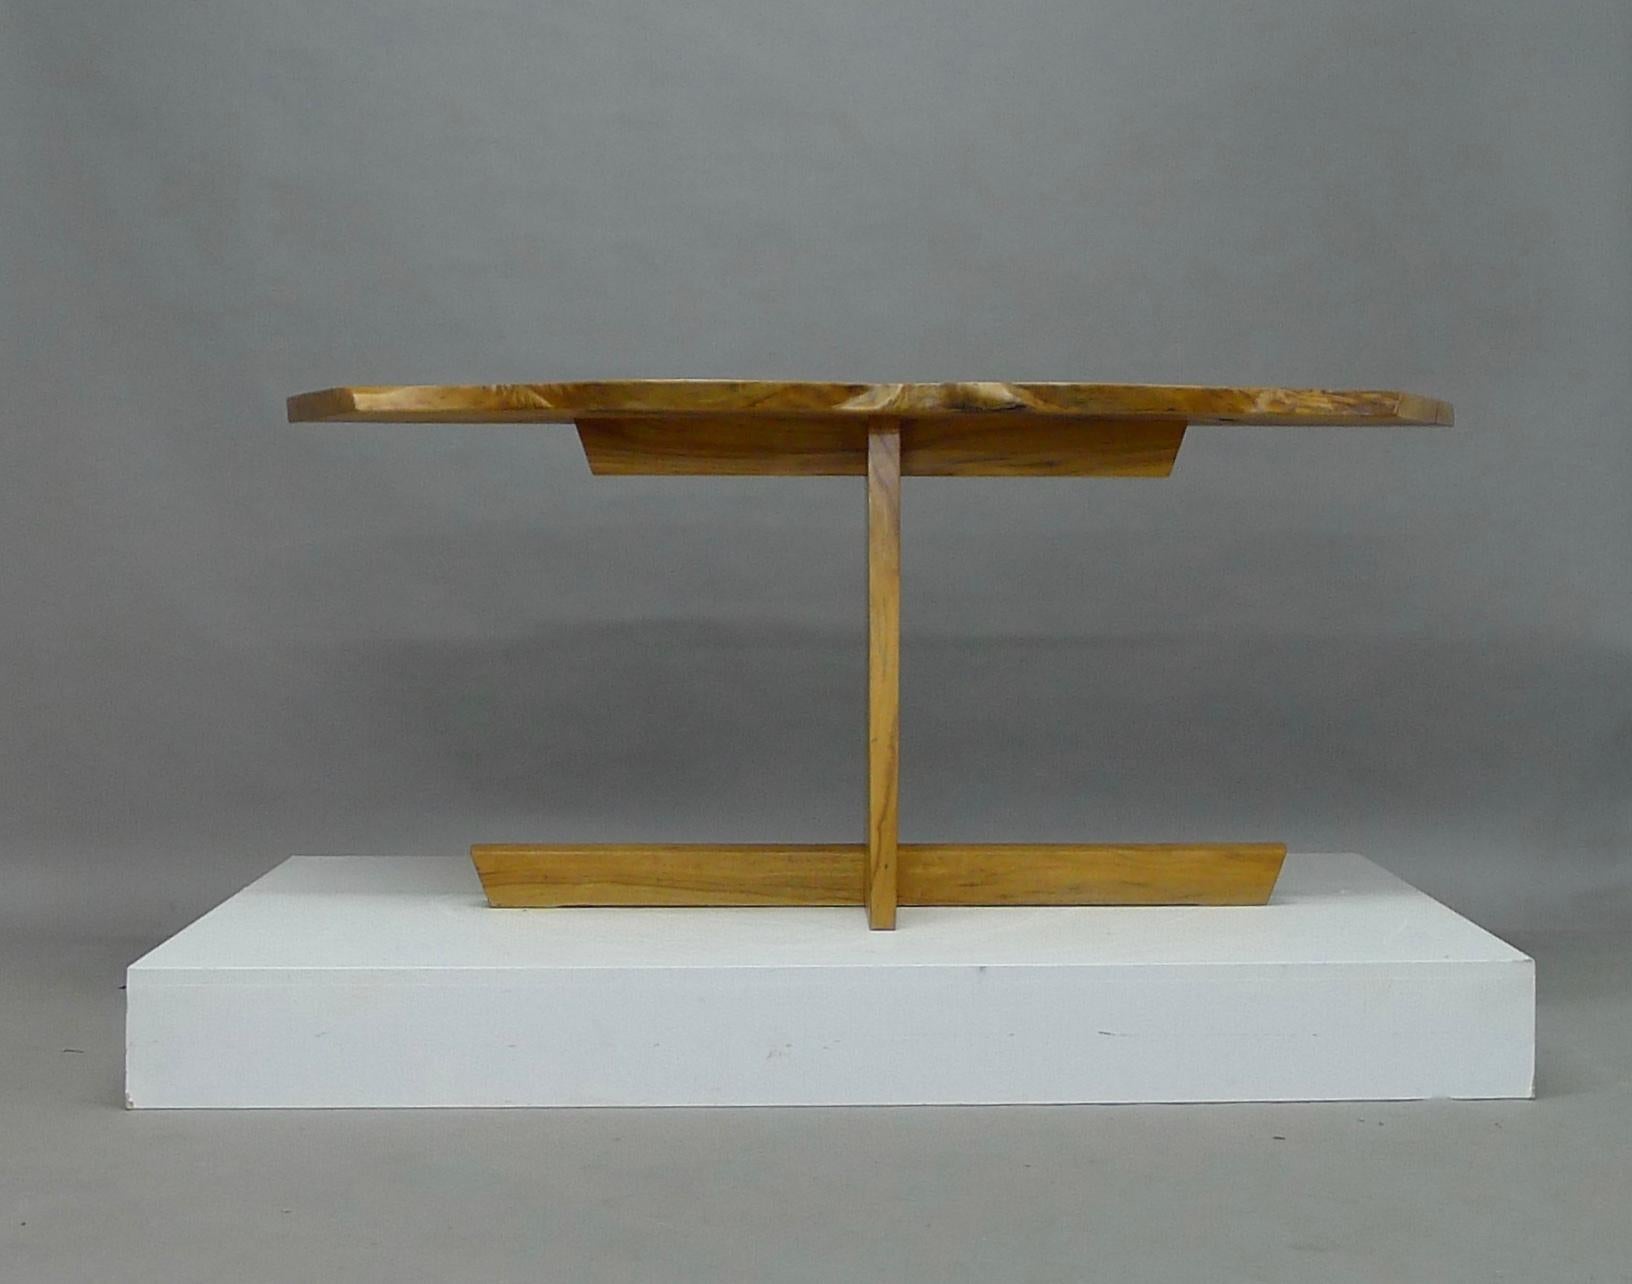 George Nakashima Cabinetmaker, USA, 1987. A stunning Greenrock table with highly figured single slab top in Butternut wood. Features three exposed knots and two walnut butterflies. Signed and dated to the underside (George Nakashima July 10th 1987)